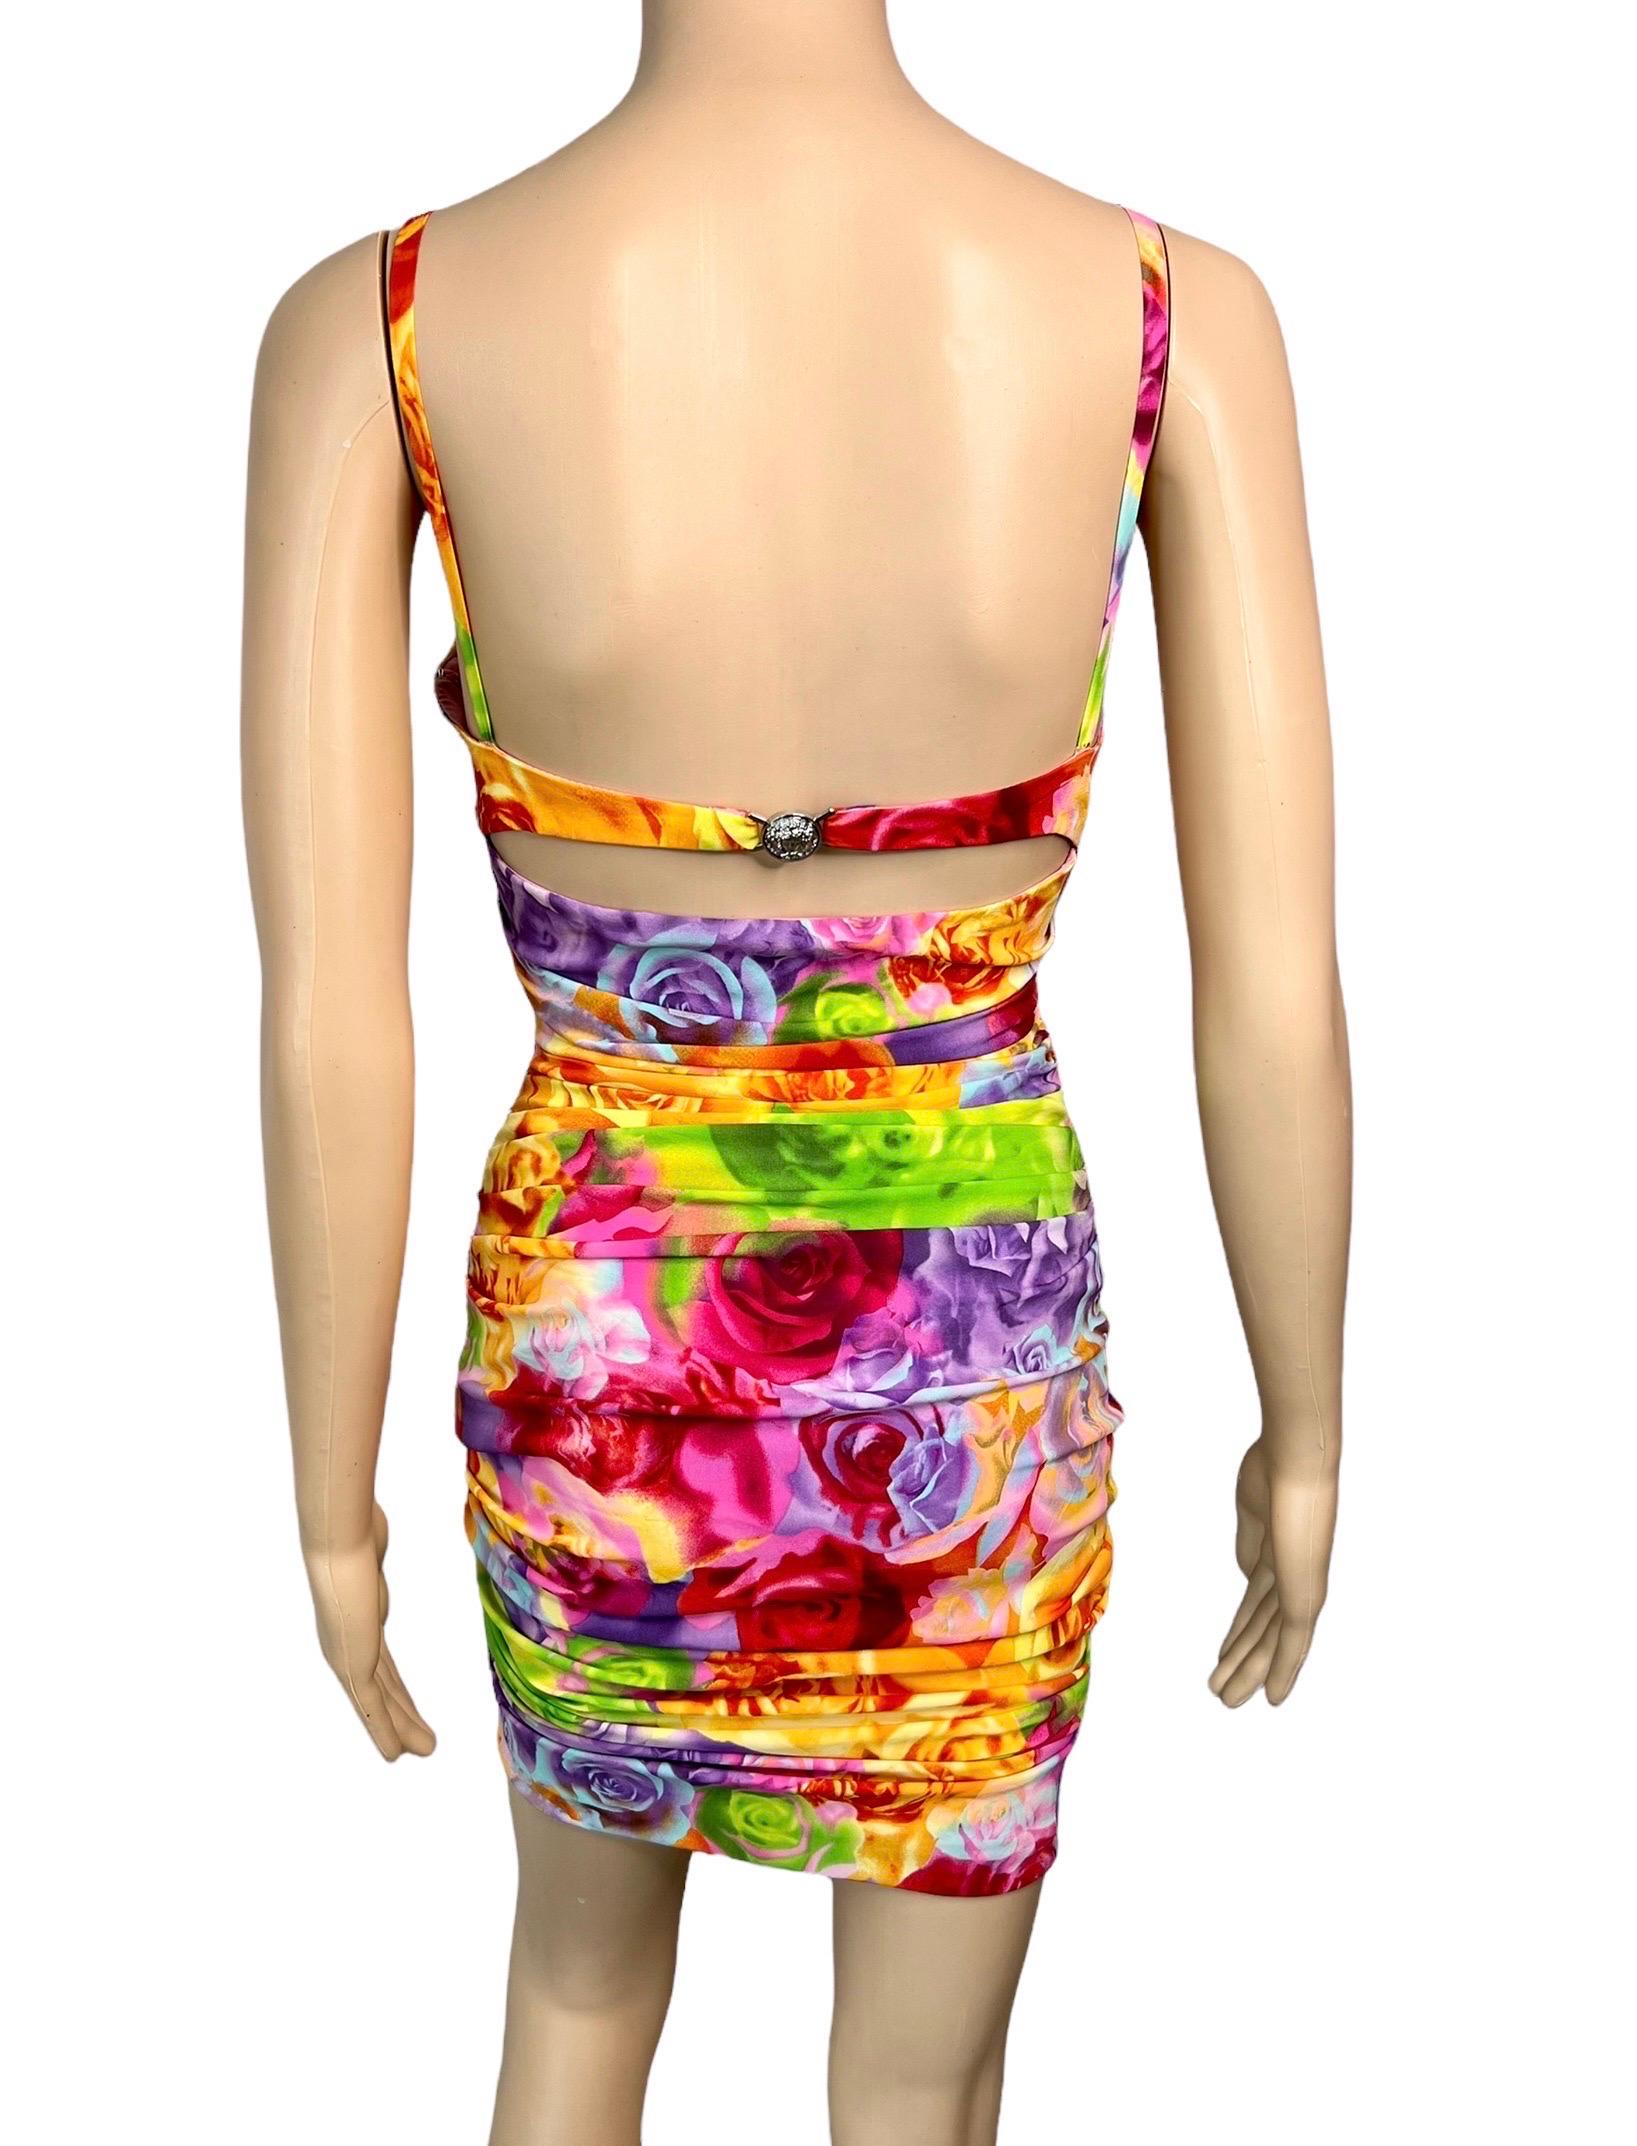 Versace S/S 2005 Bustier Bra Floral Print Bodycon Ruched Dress For Sale 1